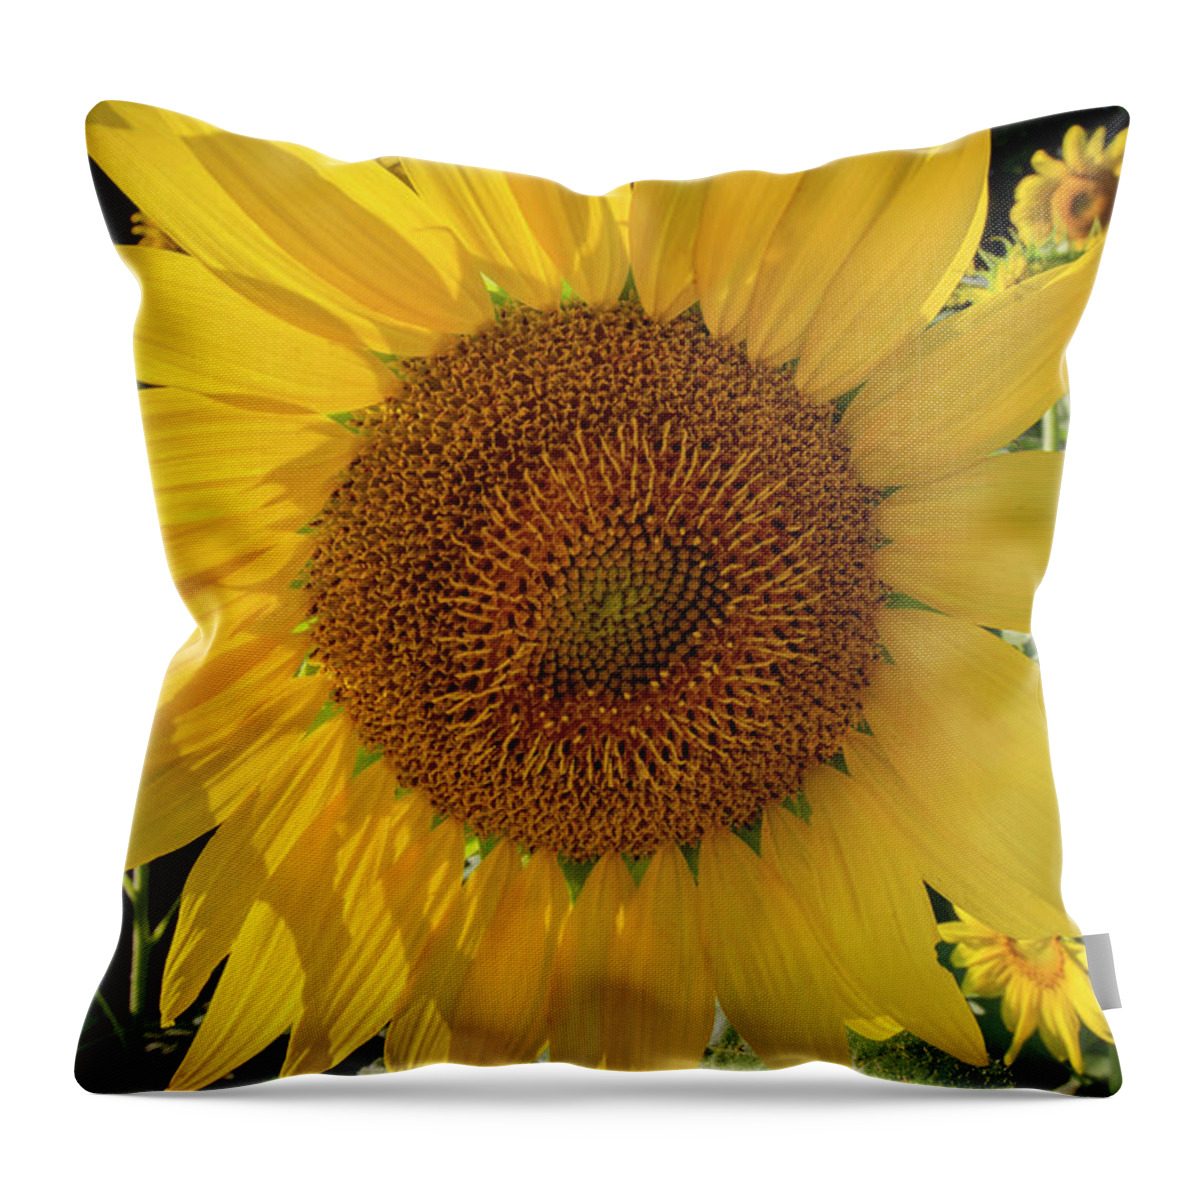 Sunflowers Throw Pillow featuring the photograph Sunny Side Up by Chris Scroggins